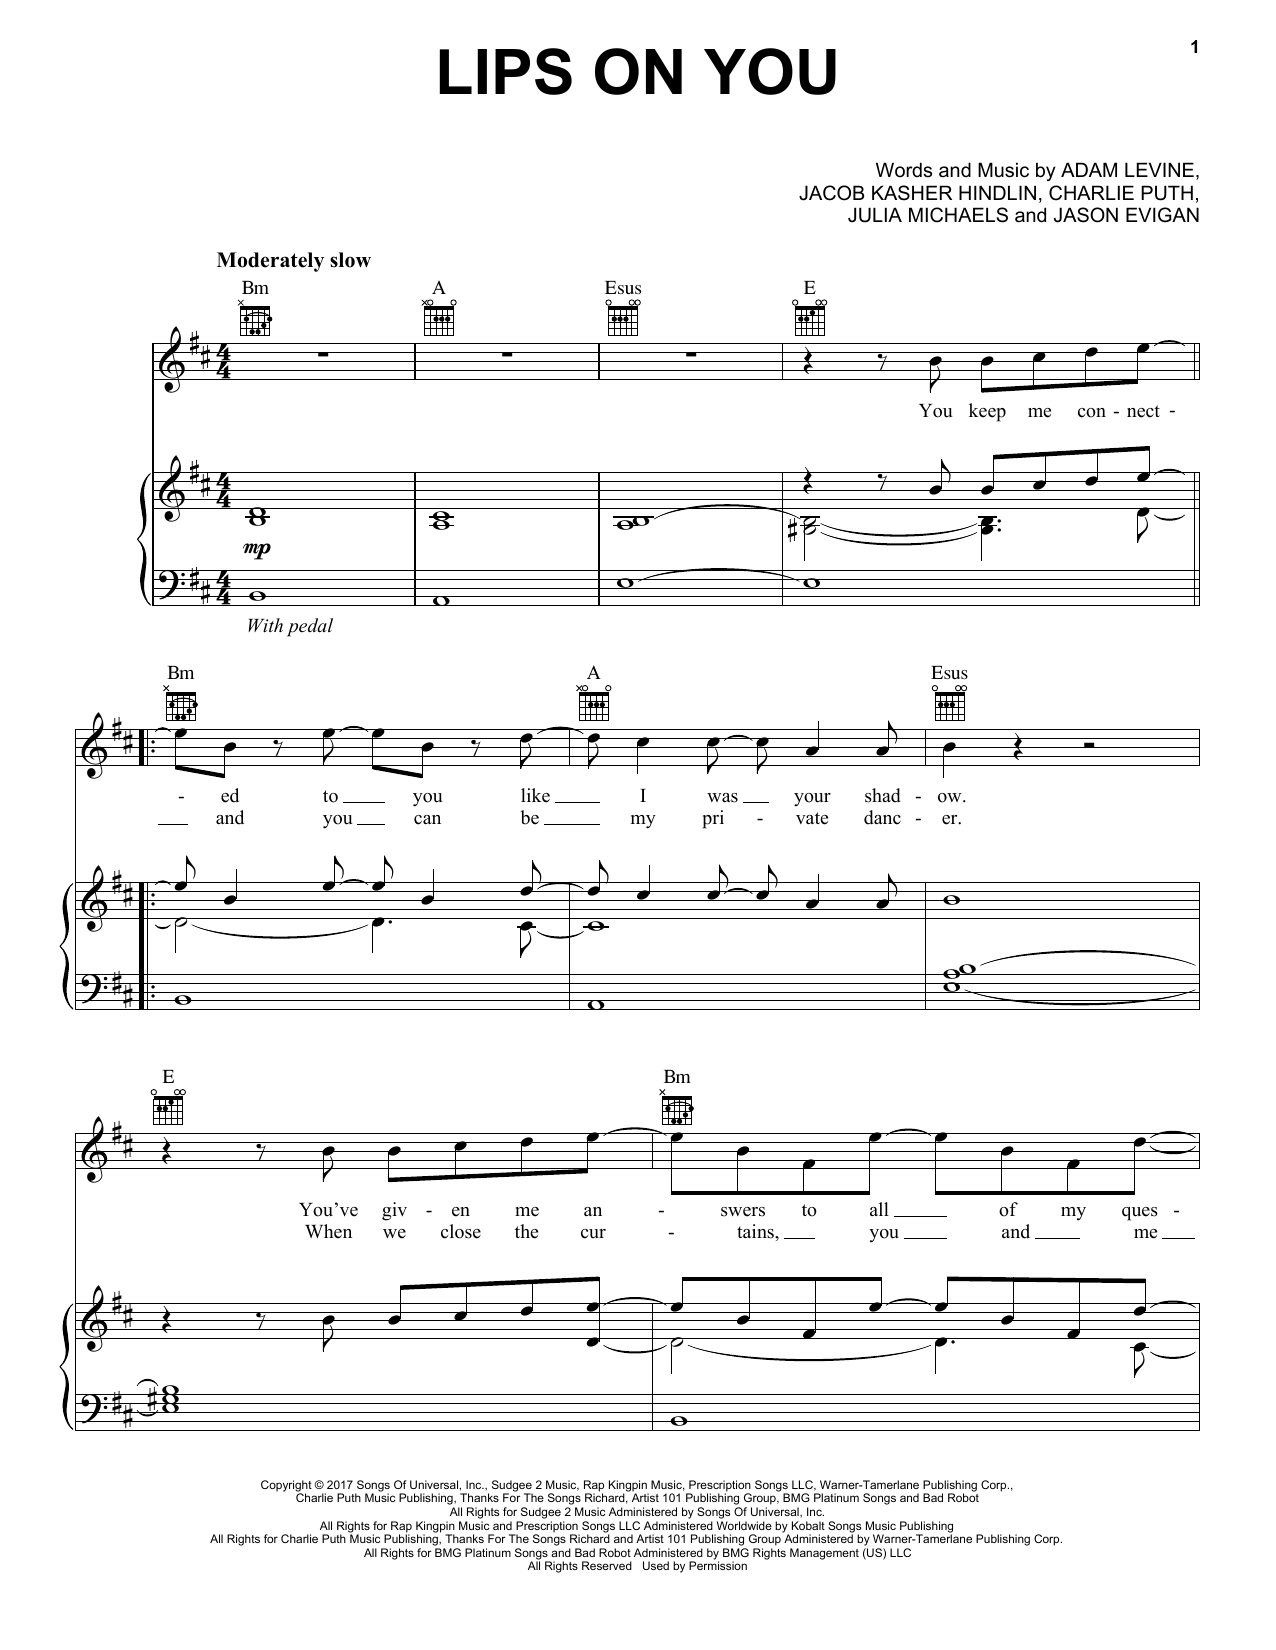 Download Maroon 5 Lips On You Sheet Music